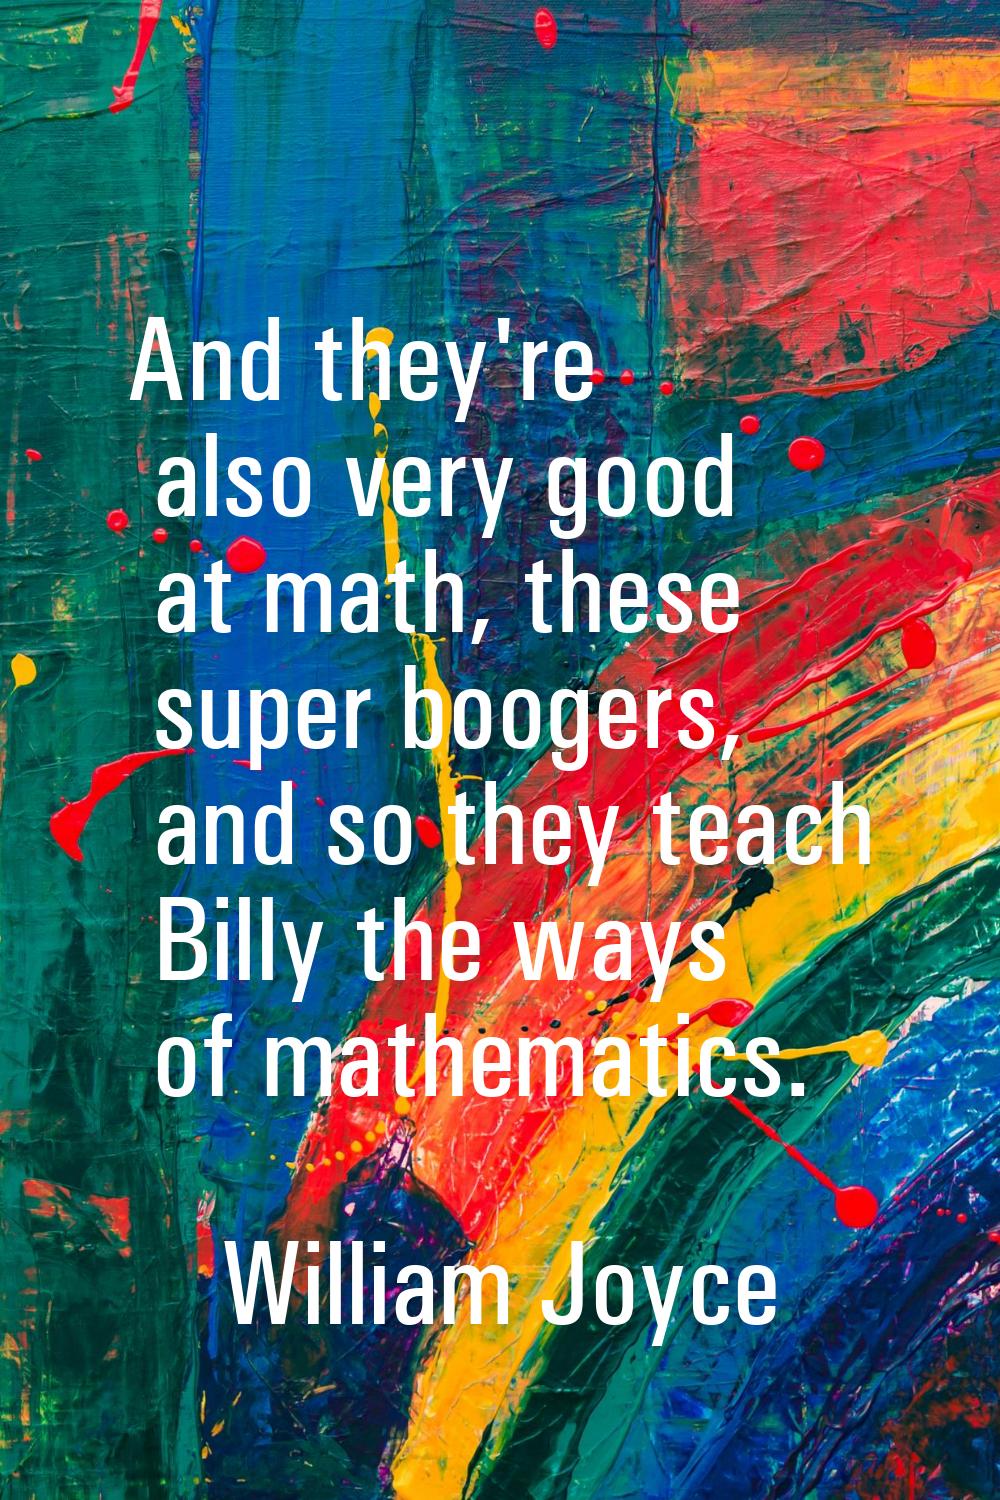 And they're also very good at math, these super boogers, and so they teach Billy the ways of mathem